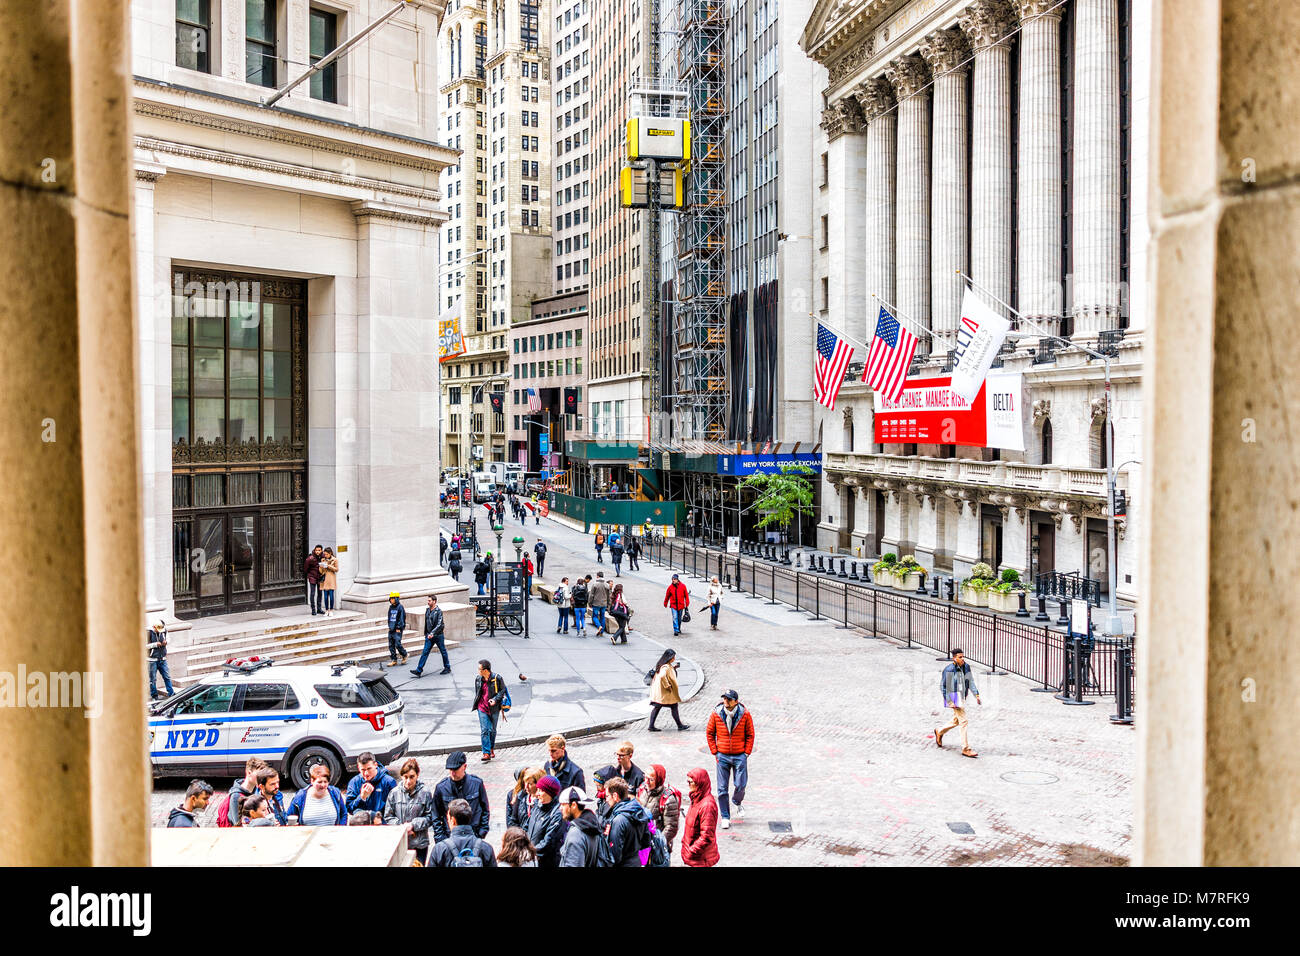 New York City, USA - October 30, 2017: Wall street NYSE stock exchange building entrance, construction scaffold, railing in NYC Manhattan lower financ Stock Photo